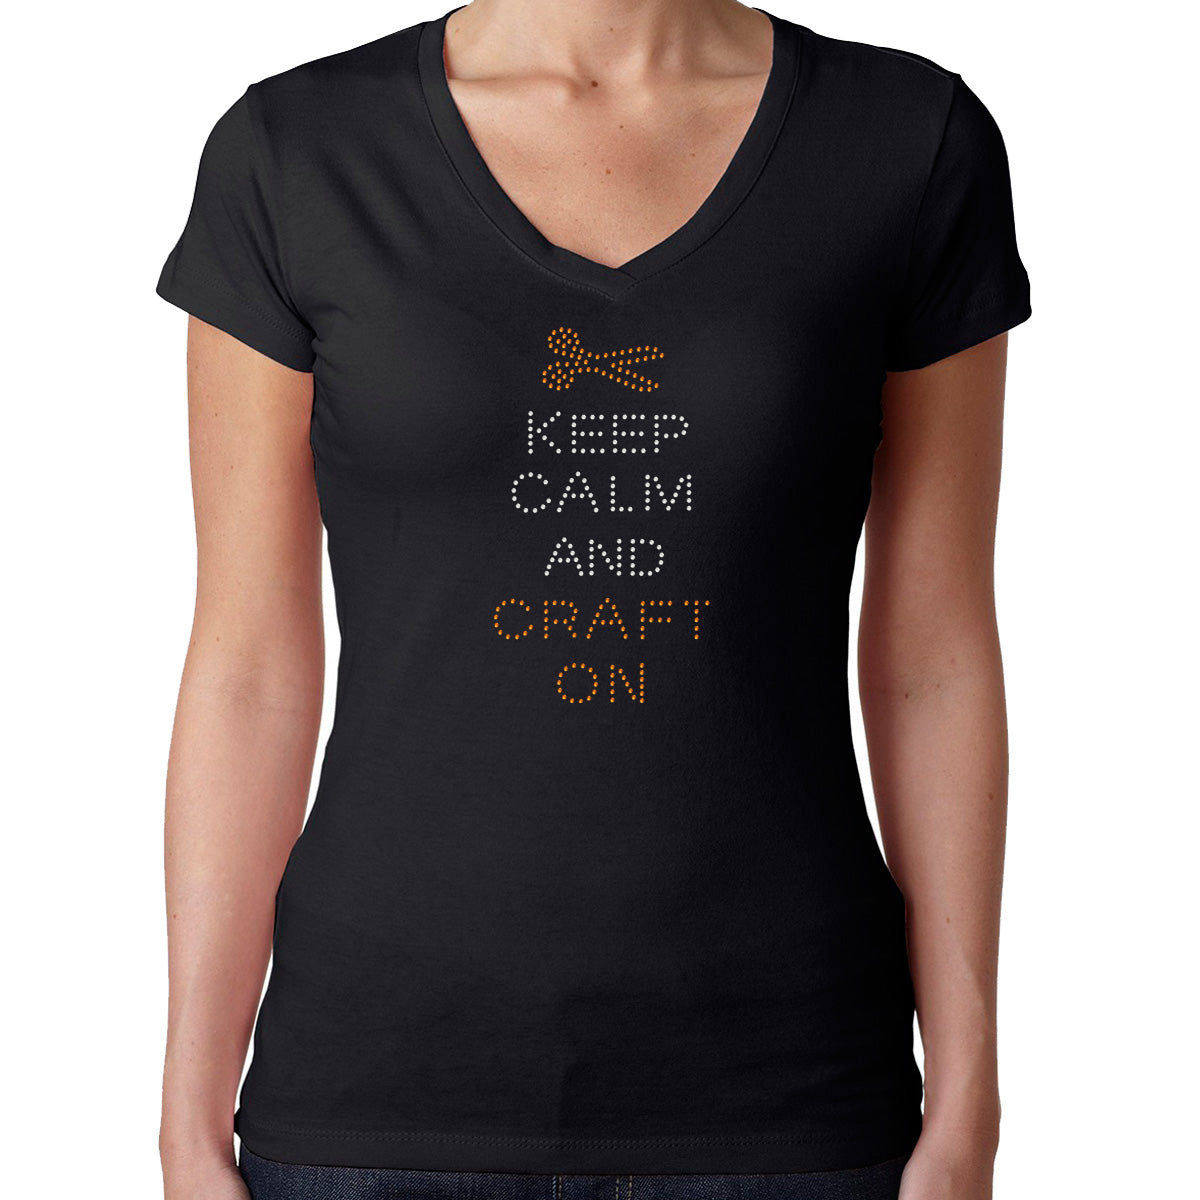 Womens T-Shirt Rhinestone Bling Black Fitted Tee Keep Calm and Craft On Scissors